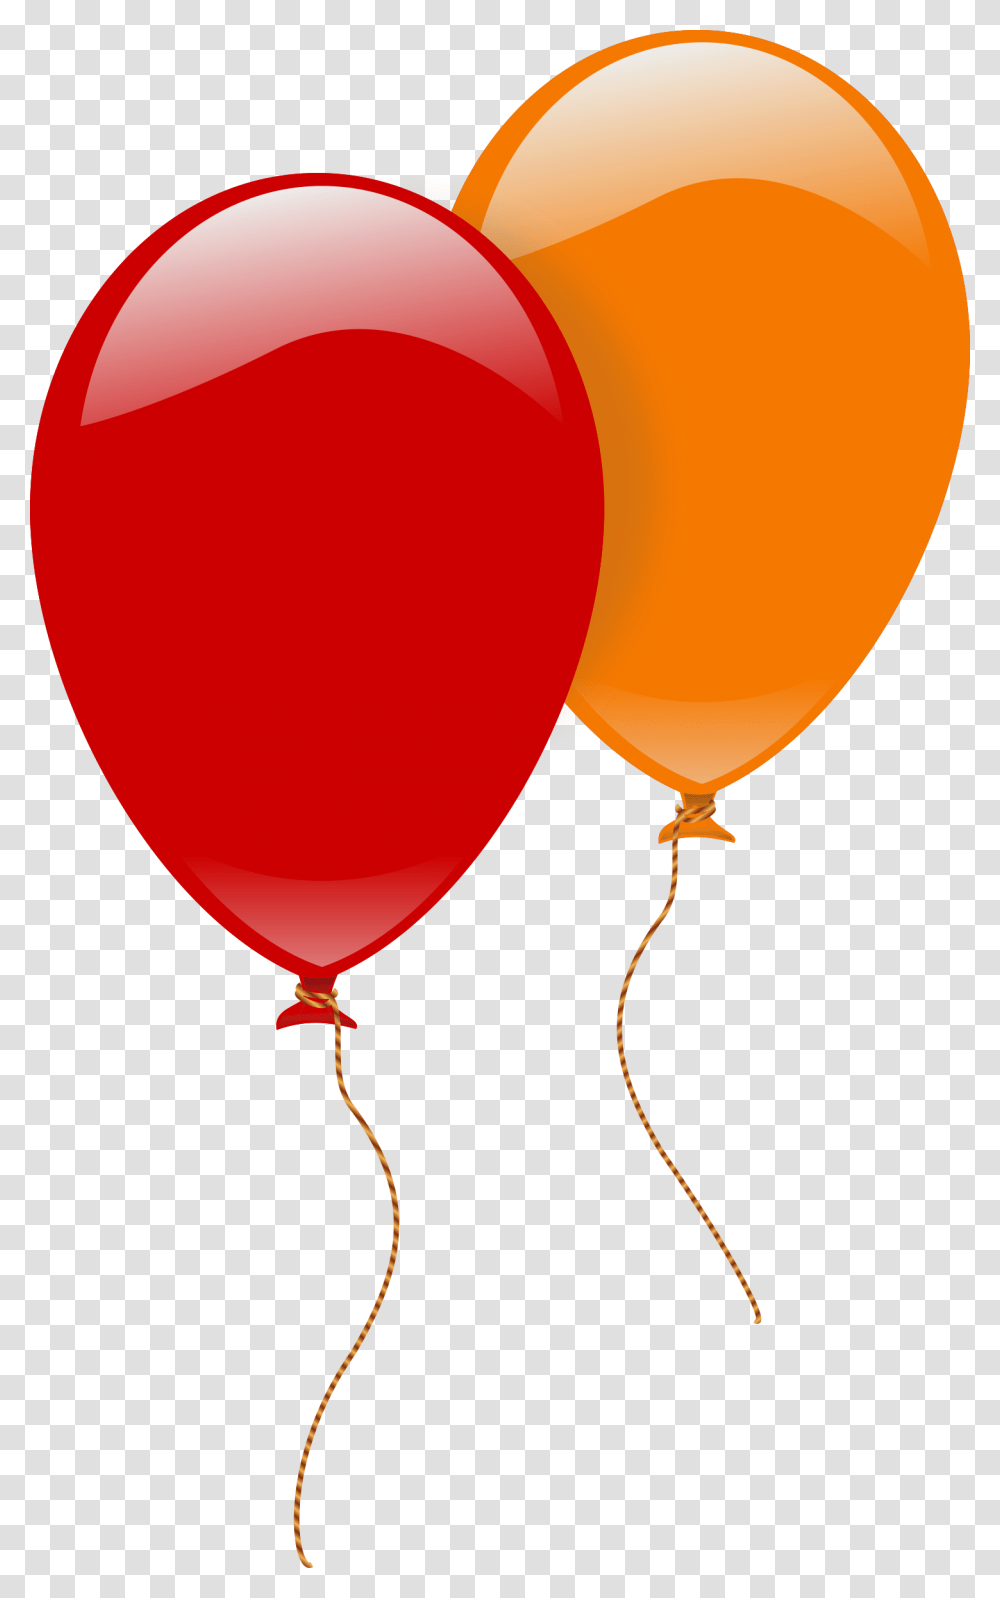 Two Balloons Two Balloons Images Transparent Png